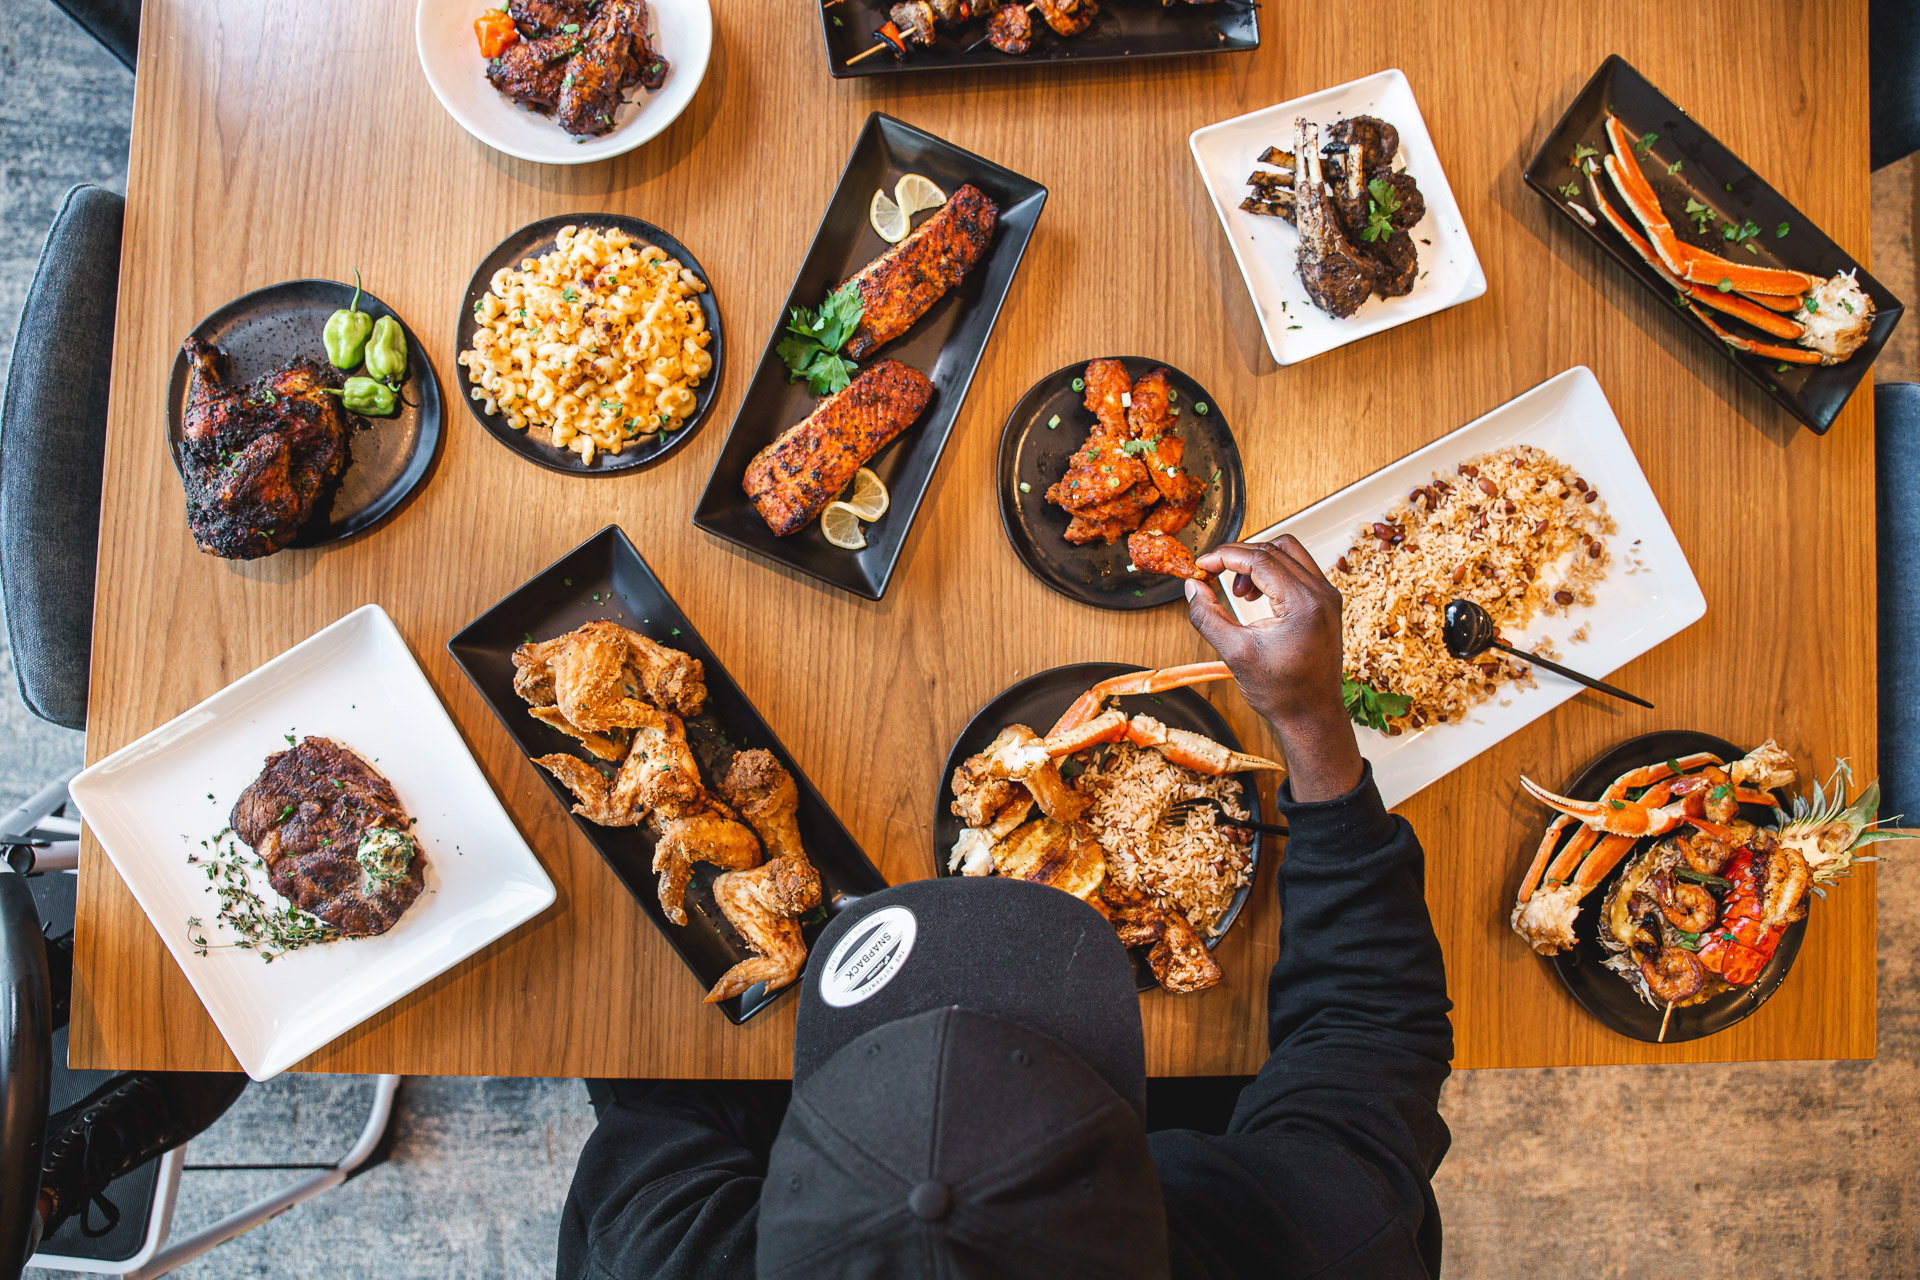 An overhead shot of Mervil sitting at a table with a spread of a dozen dishes of food in front of him. He reaches for a chicken wing with his right hand.